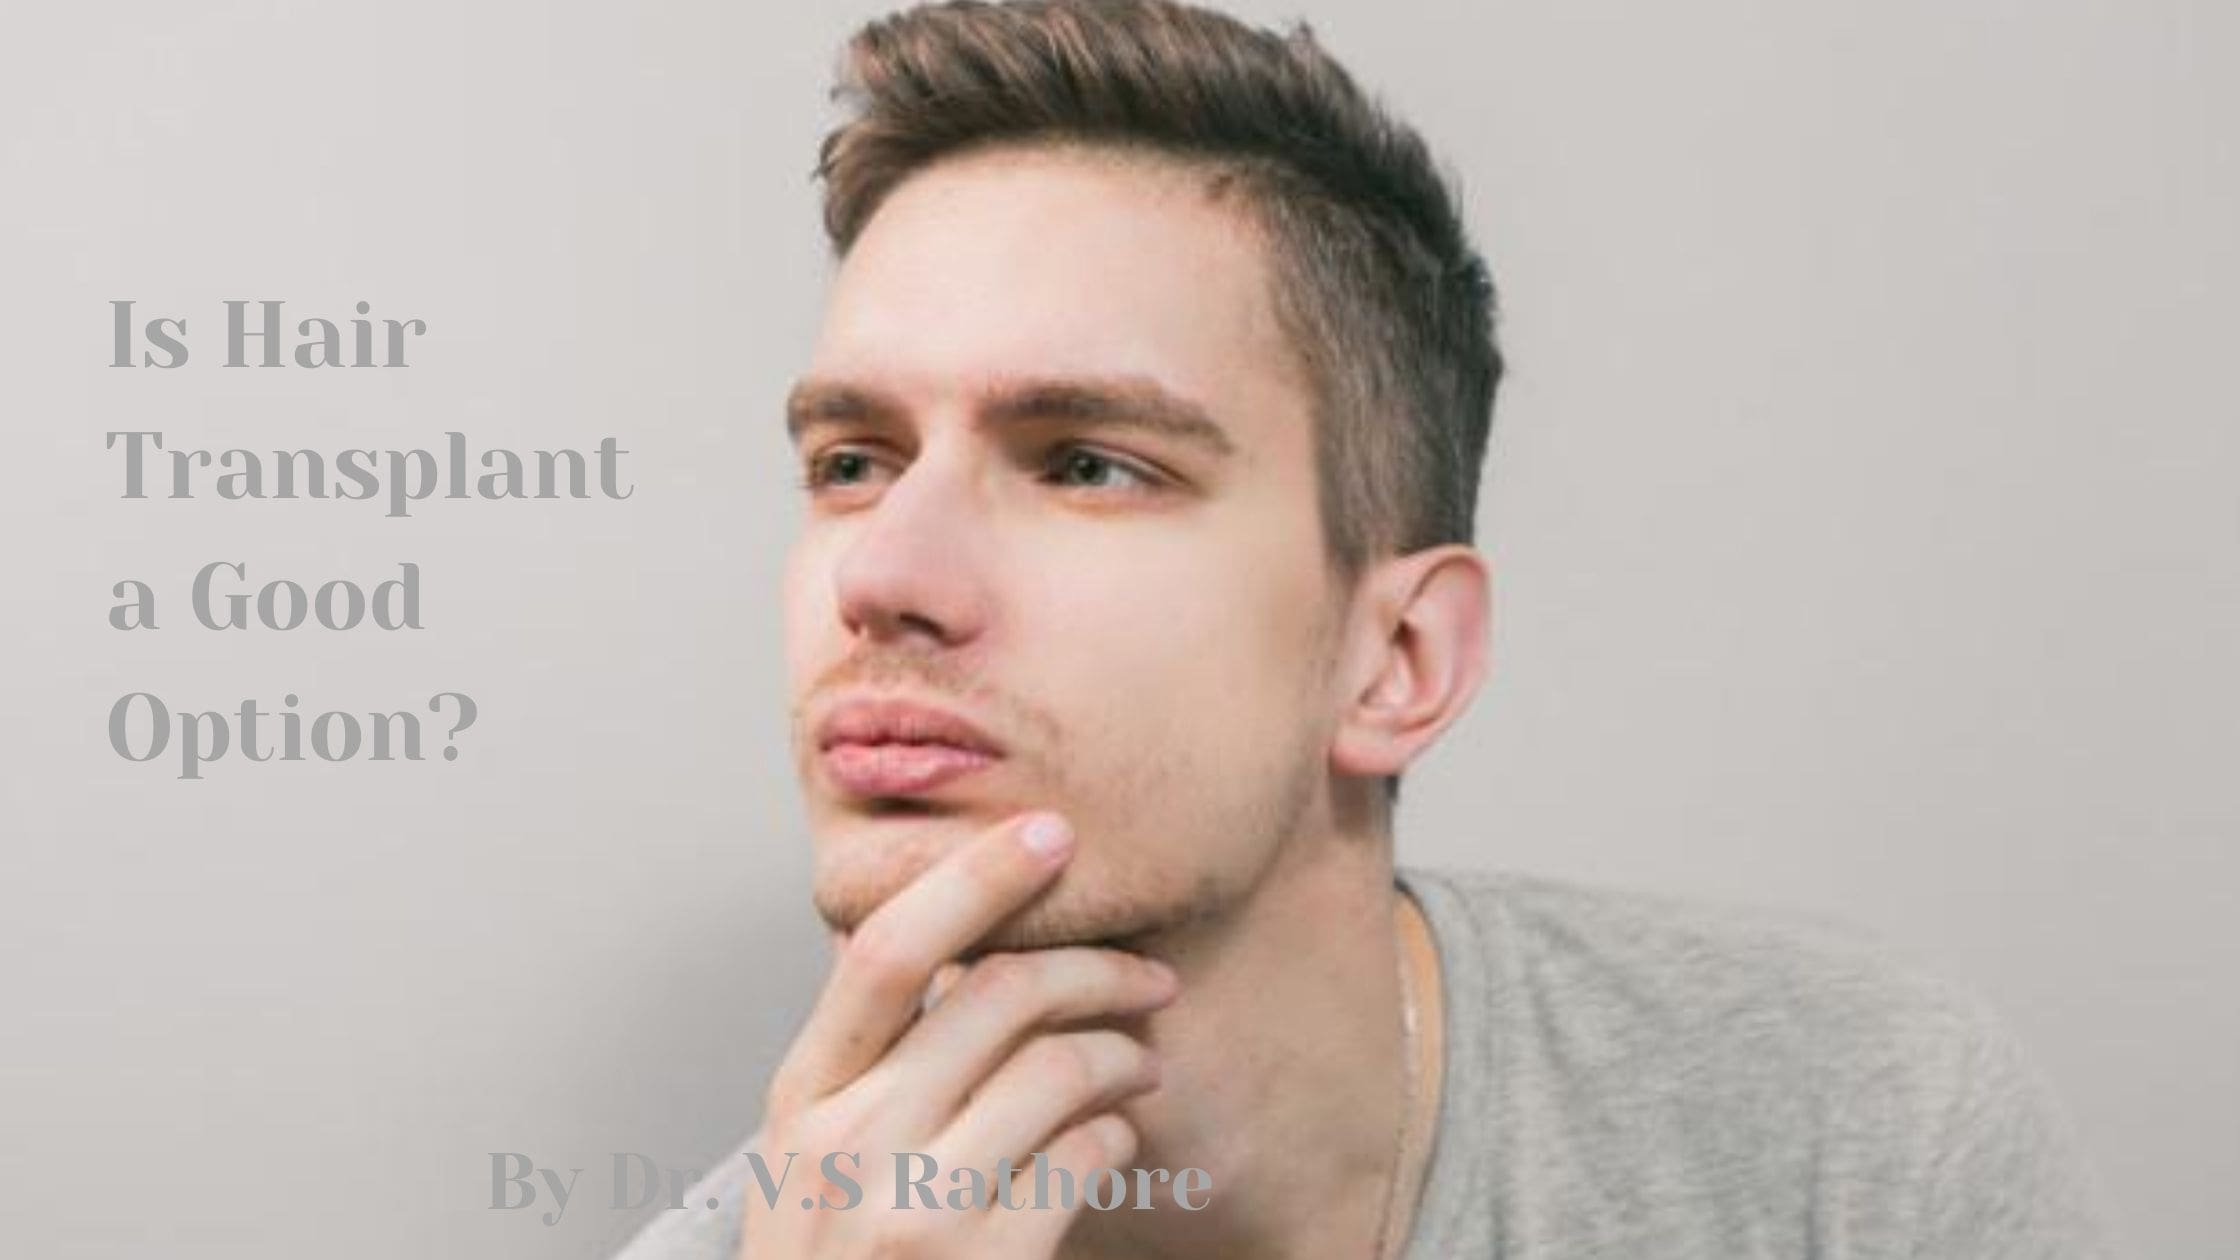 Is Hair Transplant a Good Option?